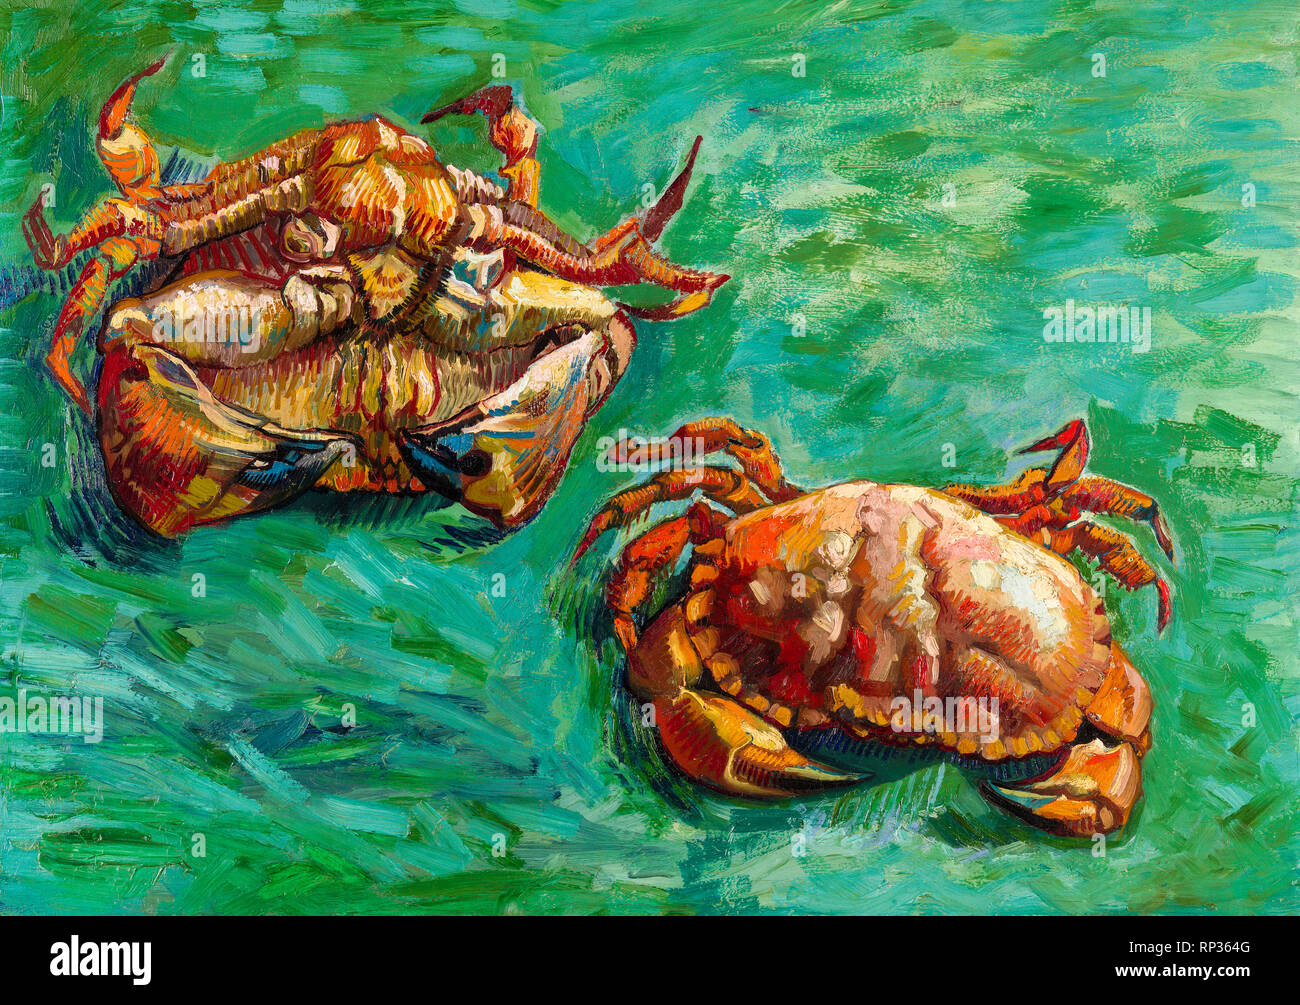 Two Crabs, Vincent Van Gogh, 1889, painting Stock Photo